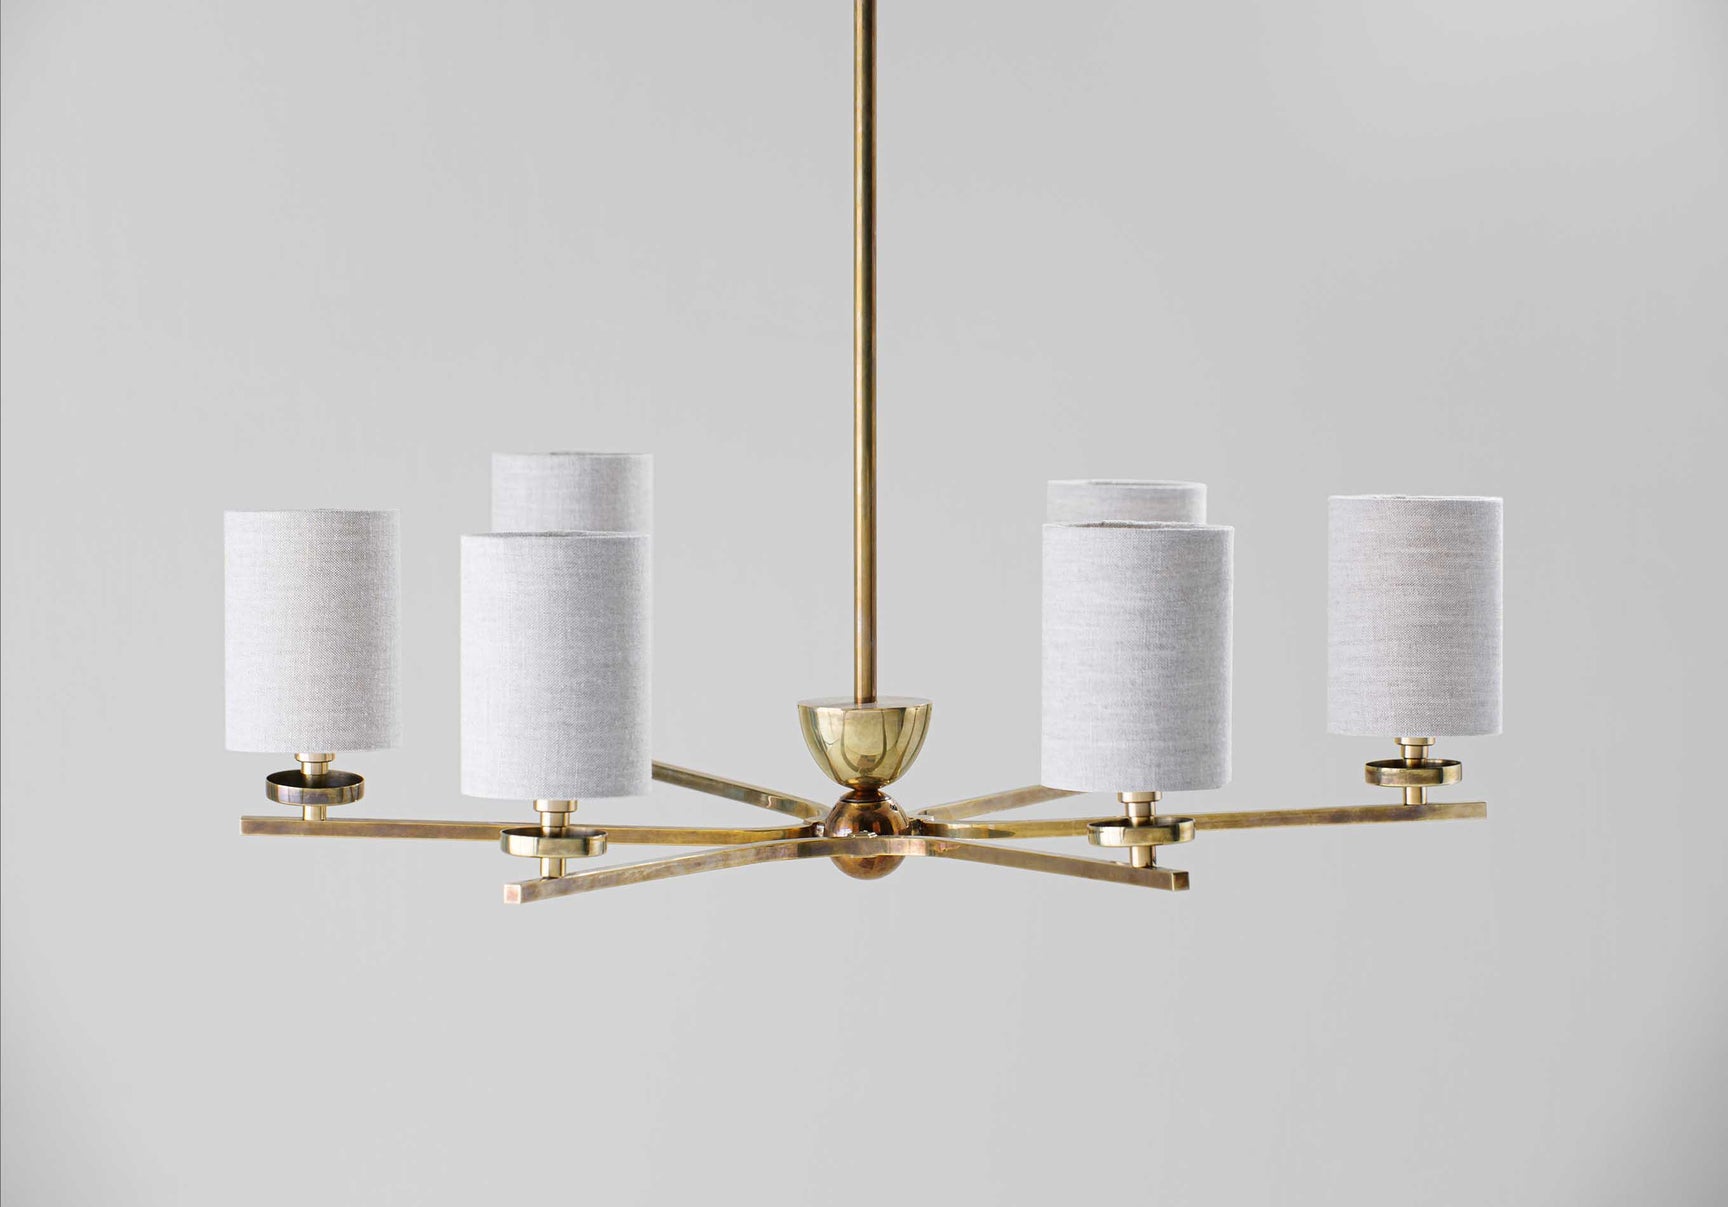 Antiqued Brass with 6 x 3.5" Top Hat lampshades in Natural Linen with Cream Card lining